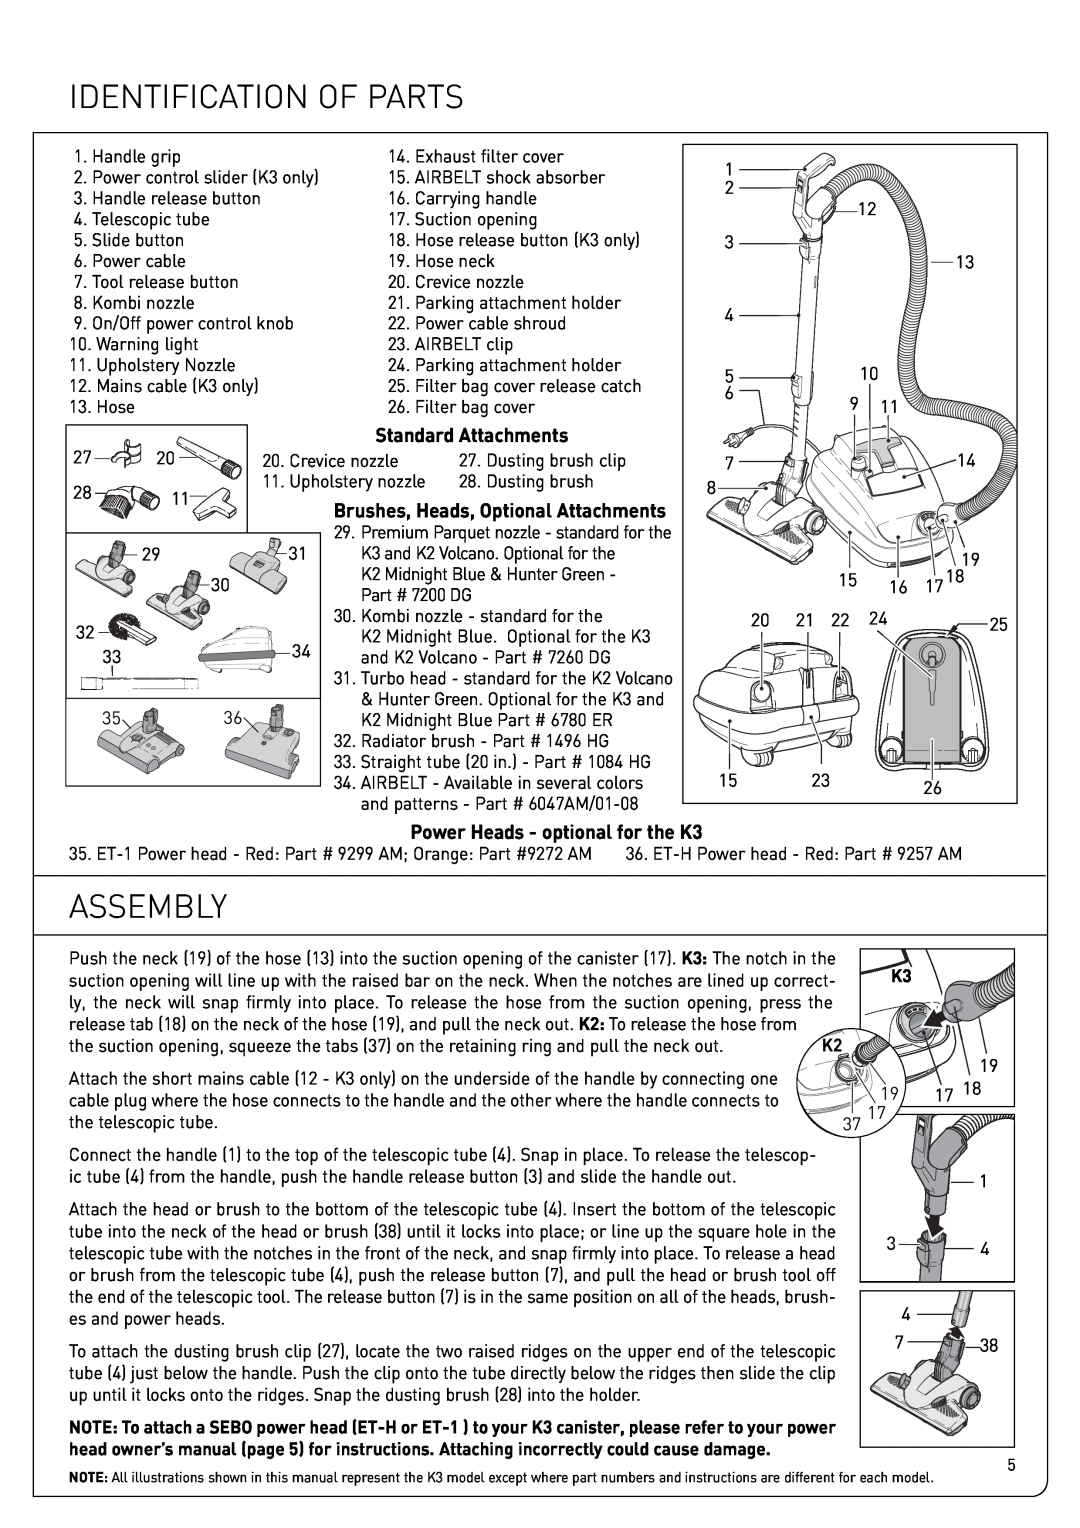 Sebo owner manual Identification Of Parts, Assembly, Power Heads - optional for the K3 